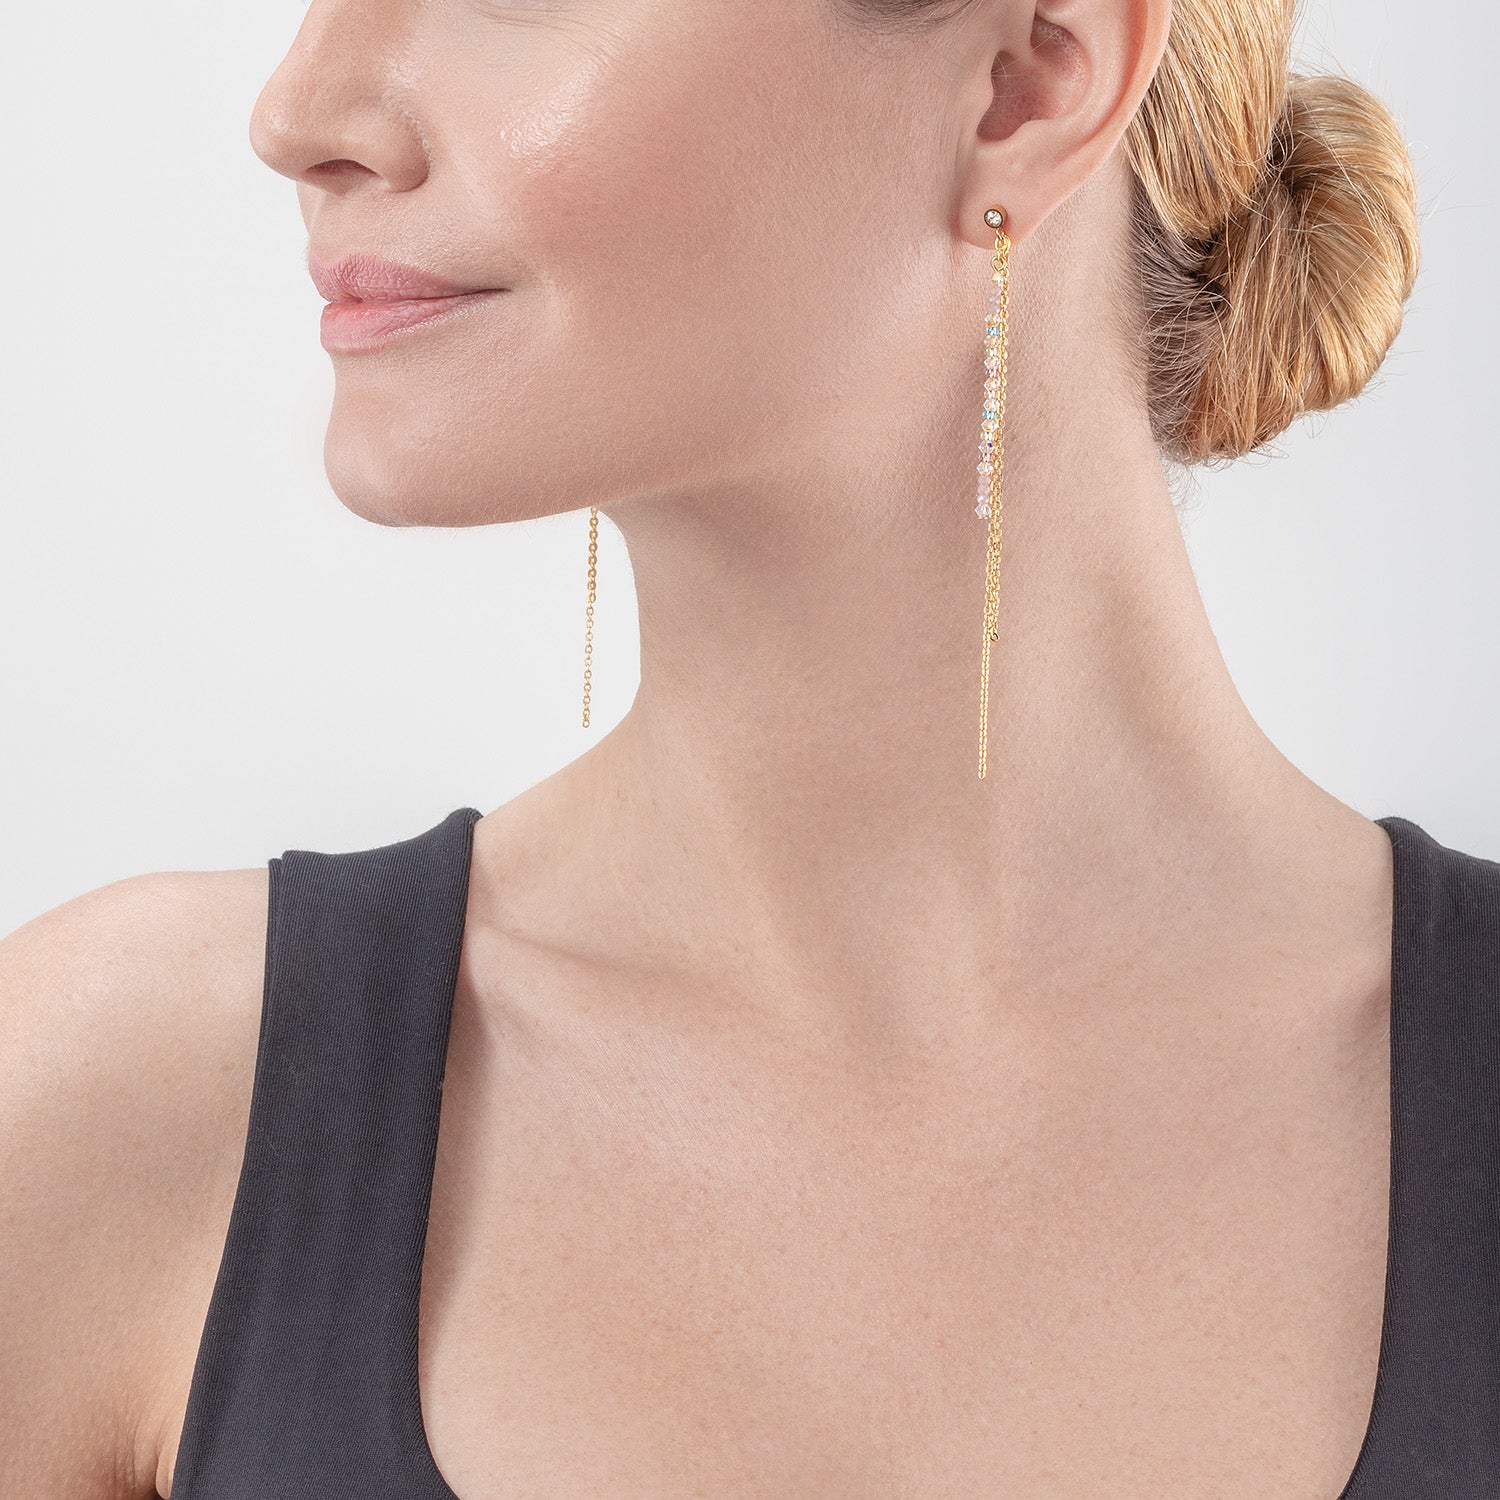 Boucles d'oreille Waterfall Delicate or multicolor pastell romantic